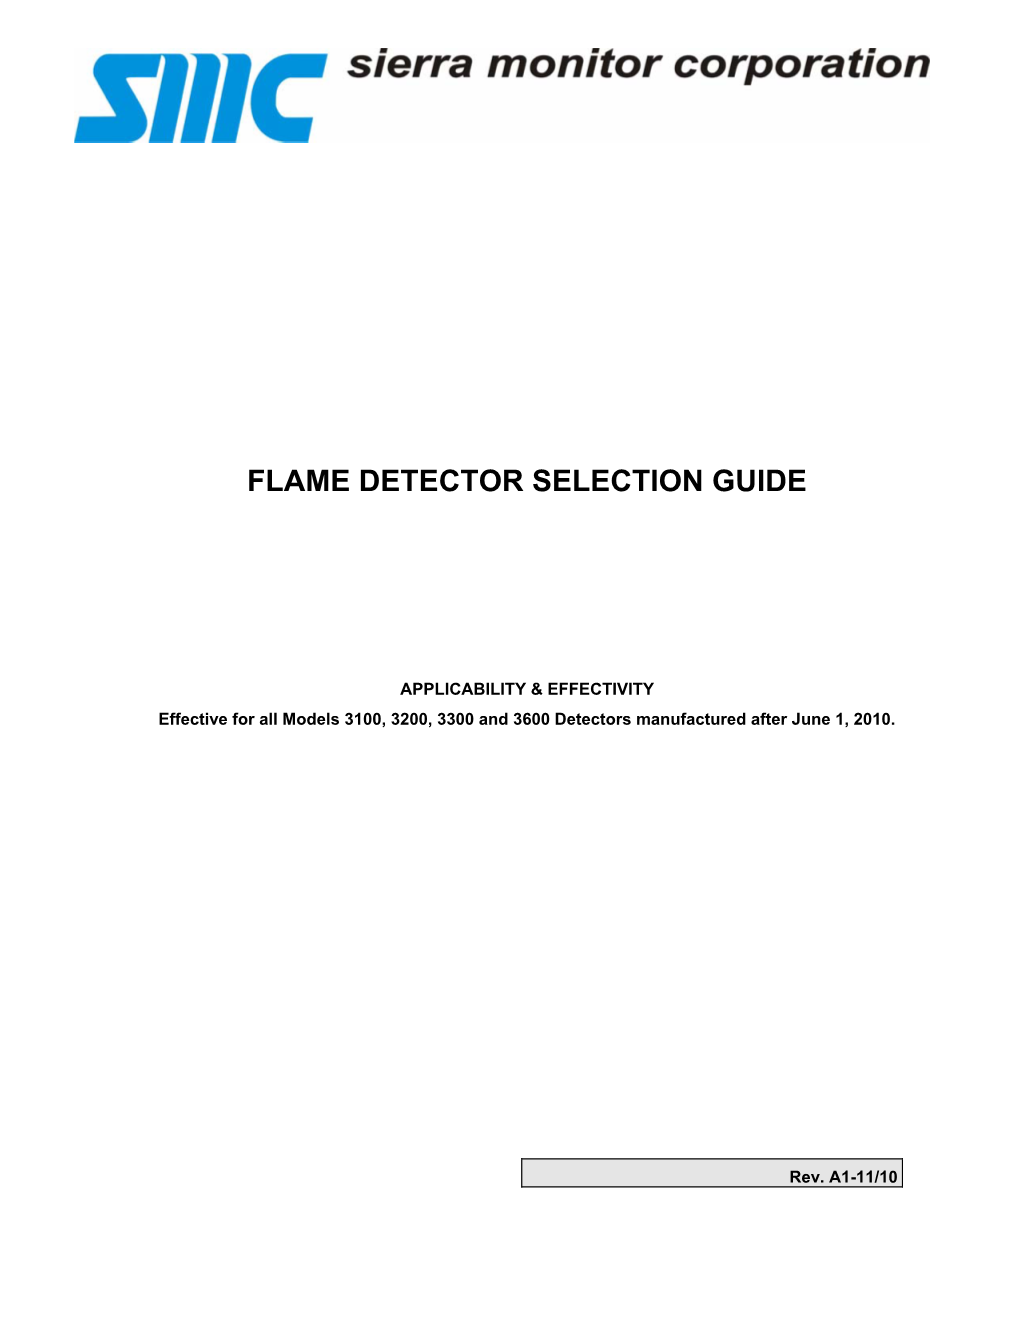 Flame Detector Selection Guide